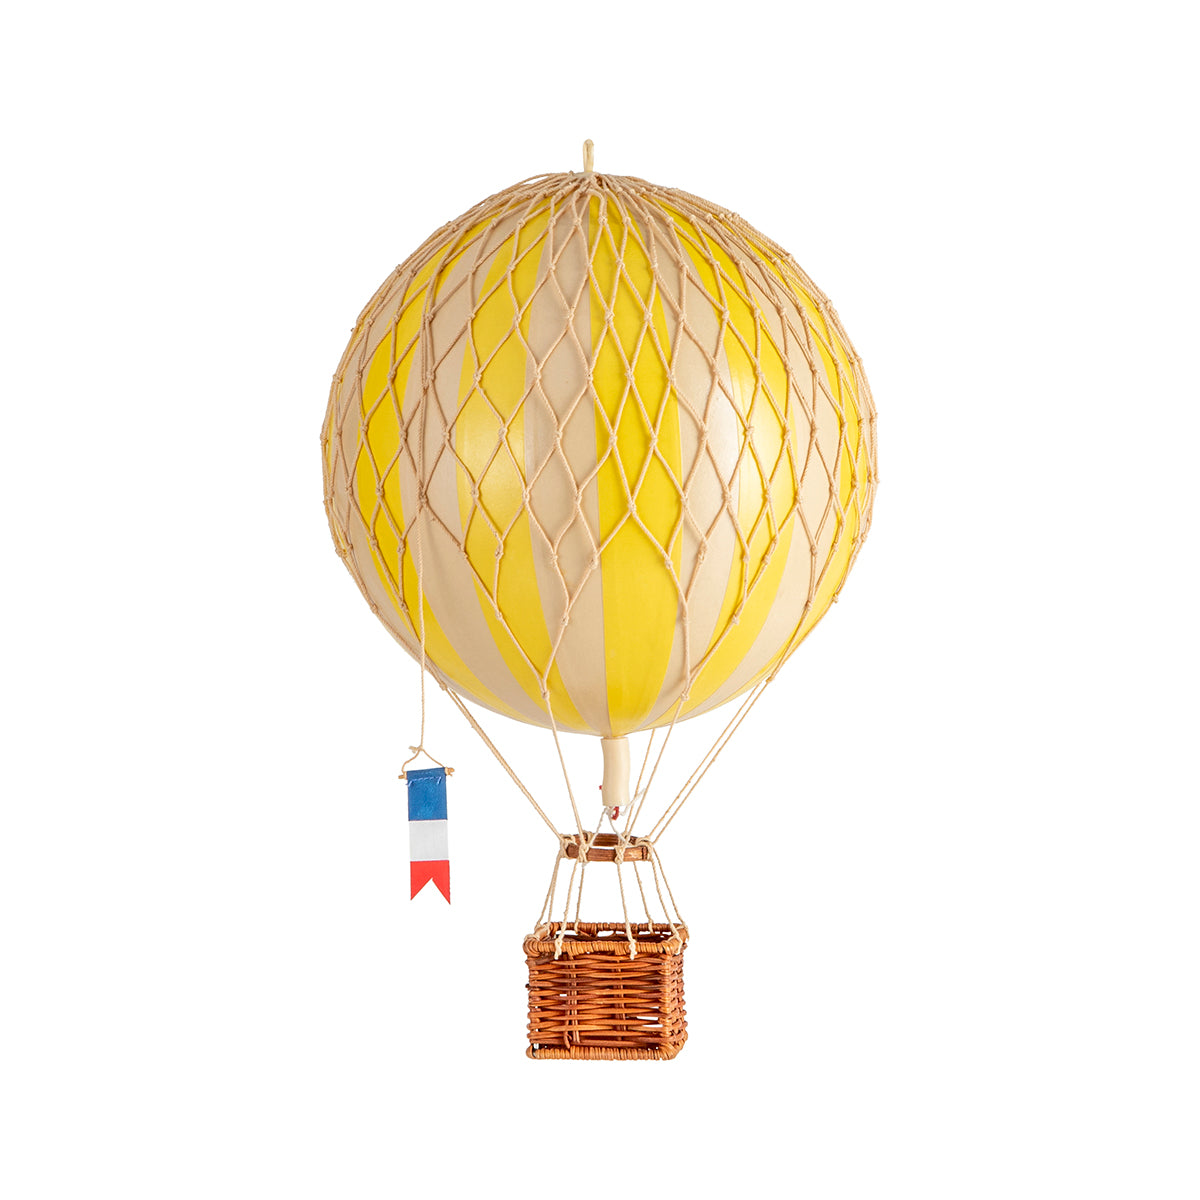 A quirky Wonderen Small Hot Air Balloon - Travels Light with a wicker basket.